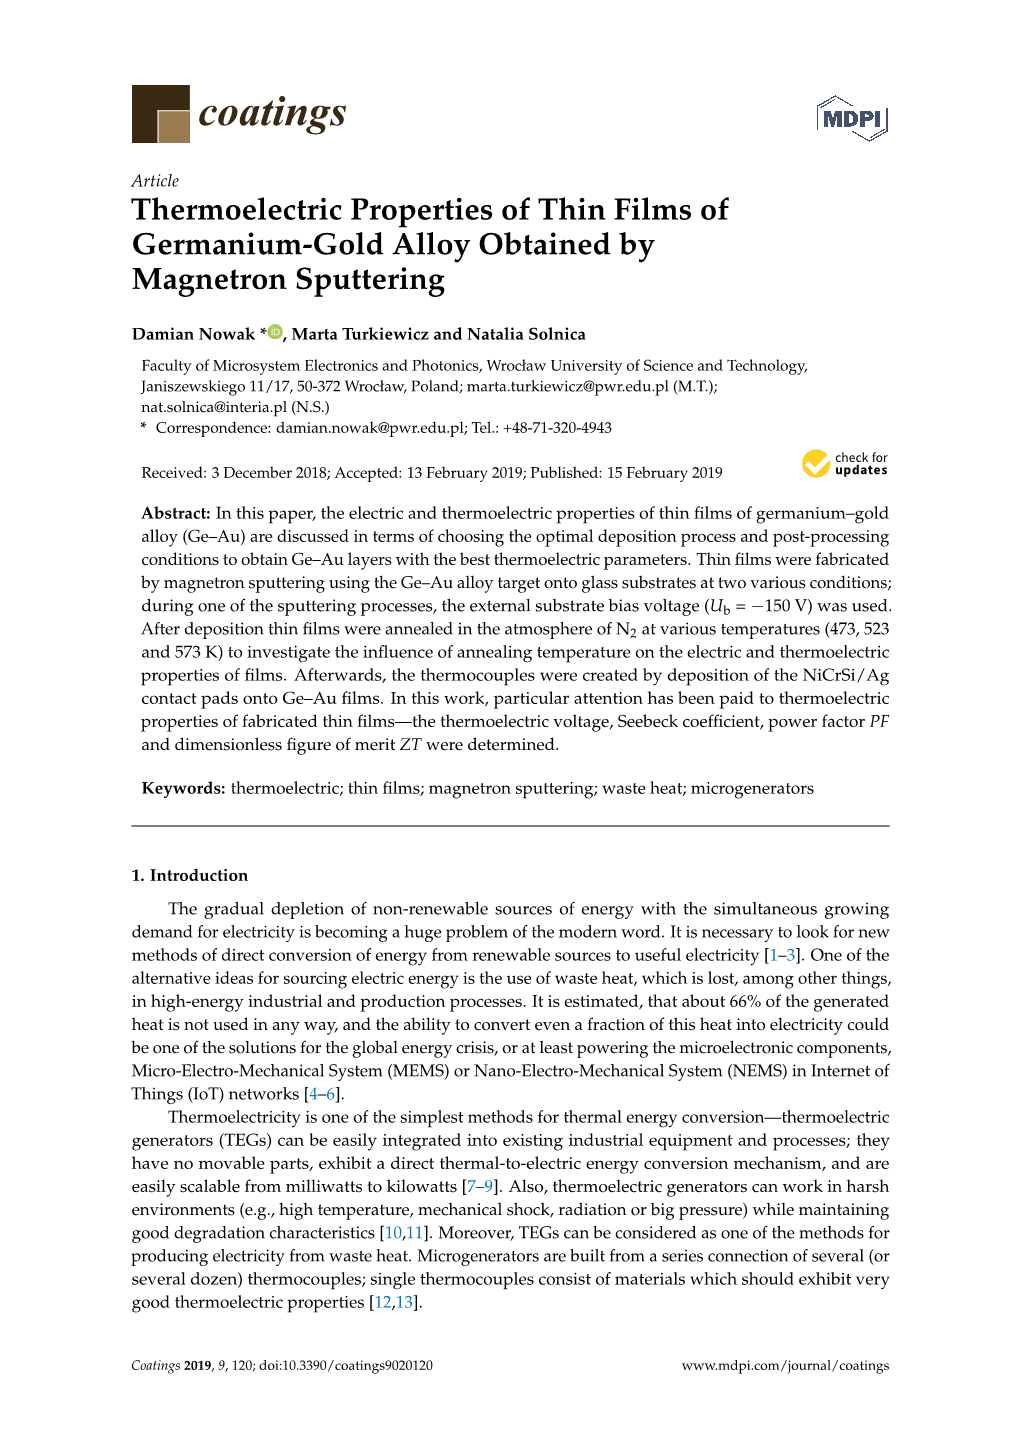 Thermoelectric Properties of Thin Films of Germanium-Gold Alloy Obtained by Magnetron Sputtering